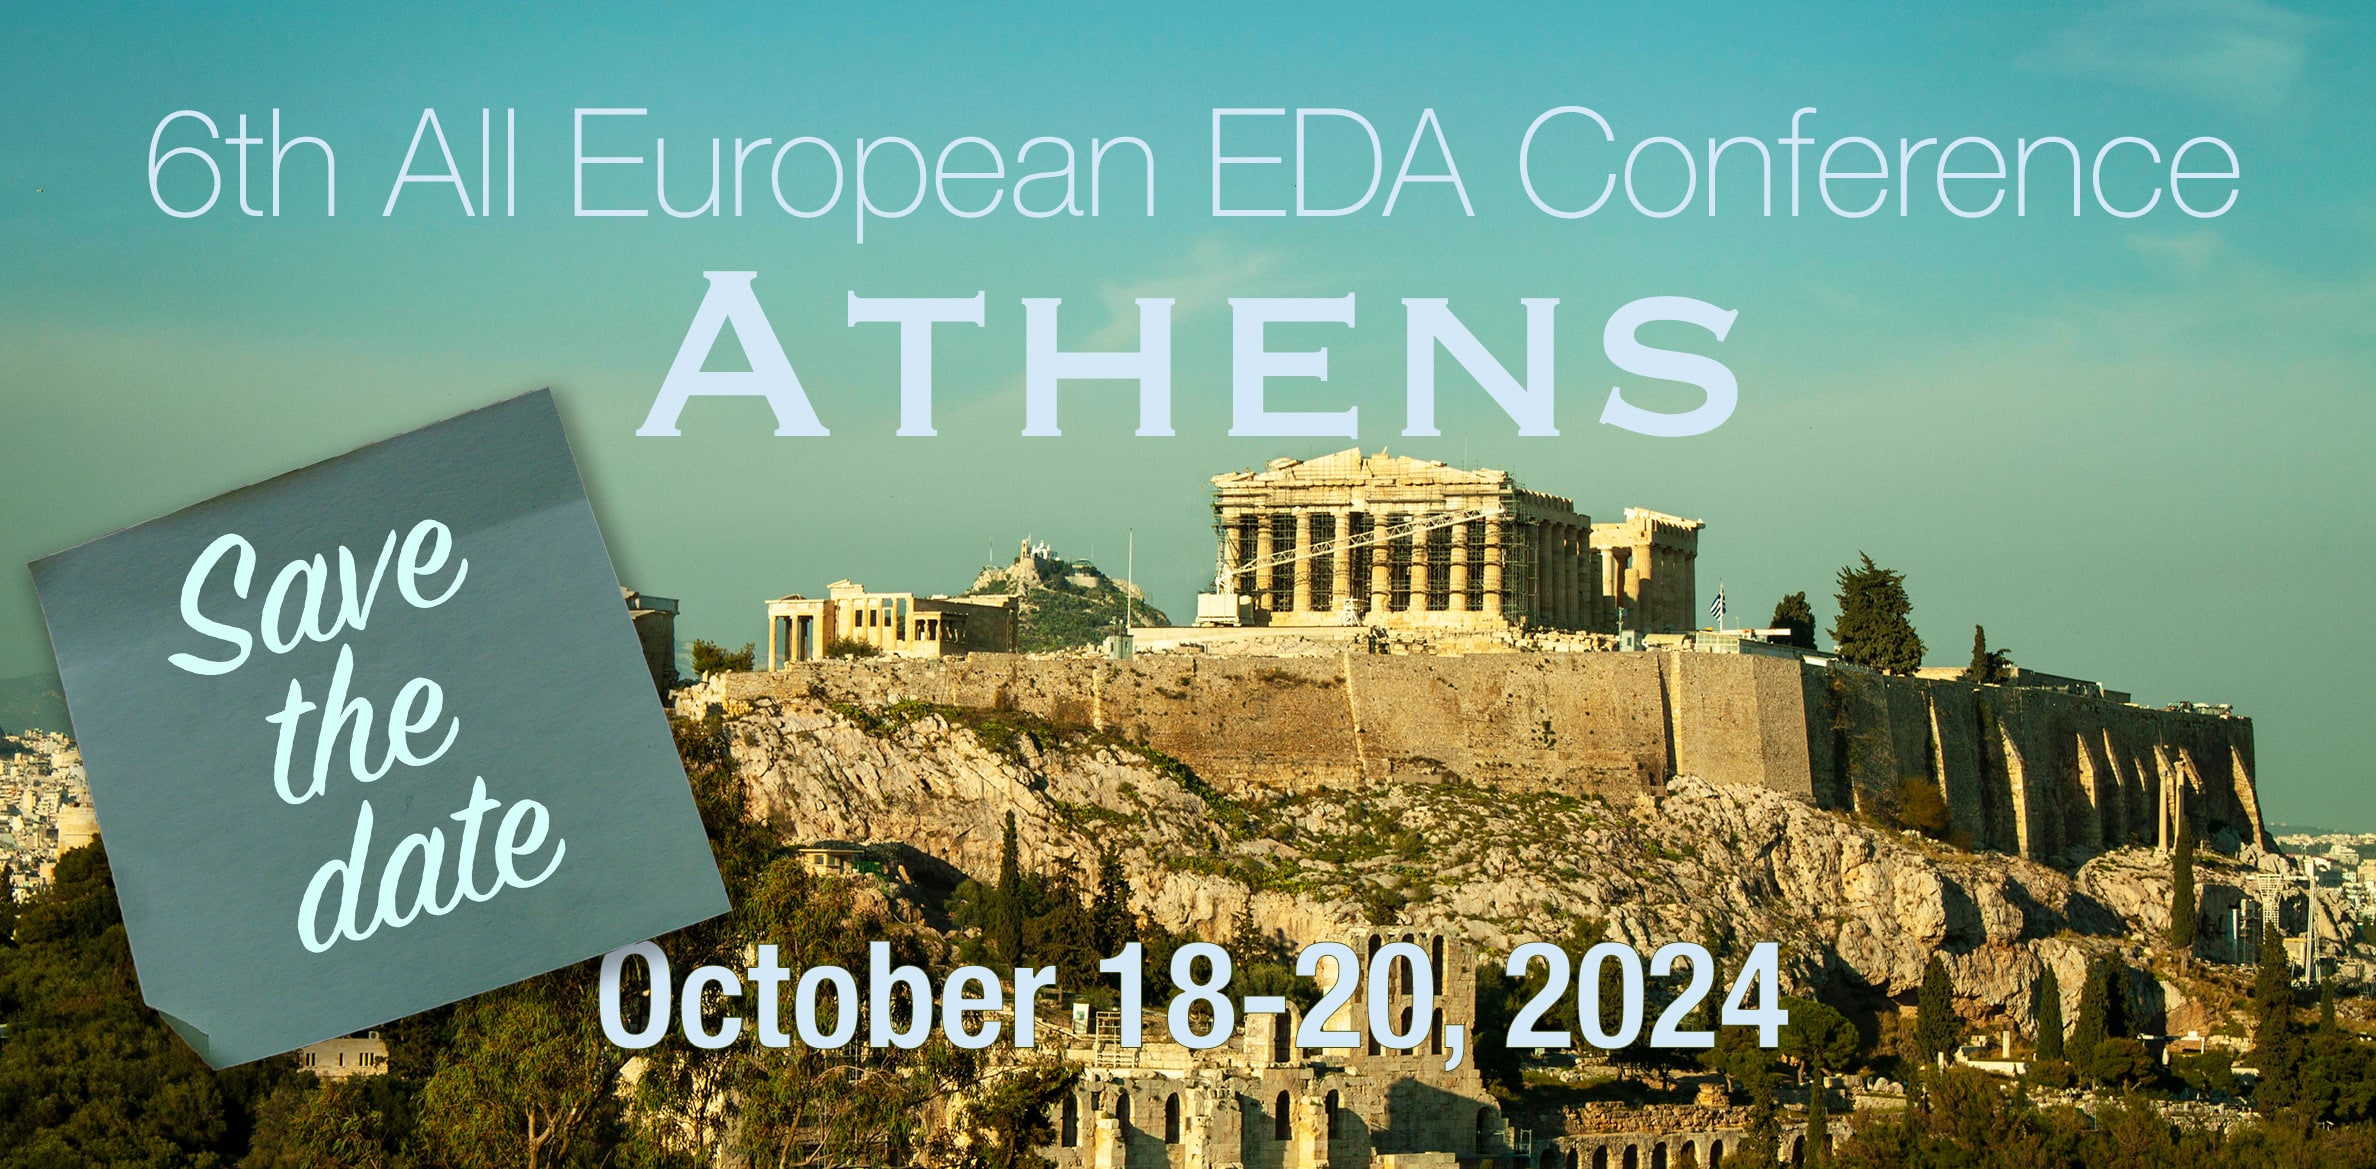 Picture of Acropolis with the text Save the date. All European EDA conference in Athens, October 18-20, 2024